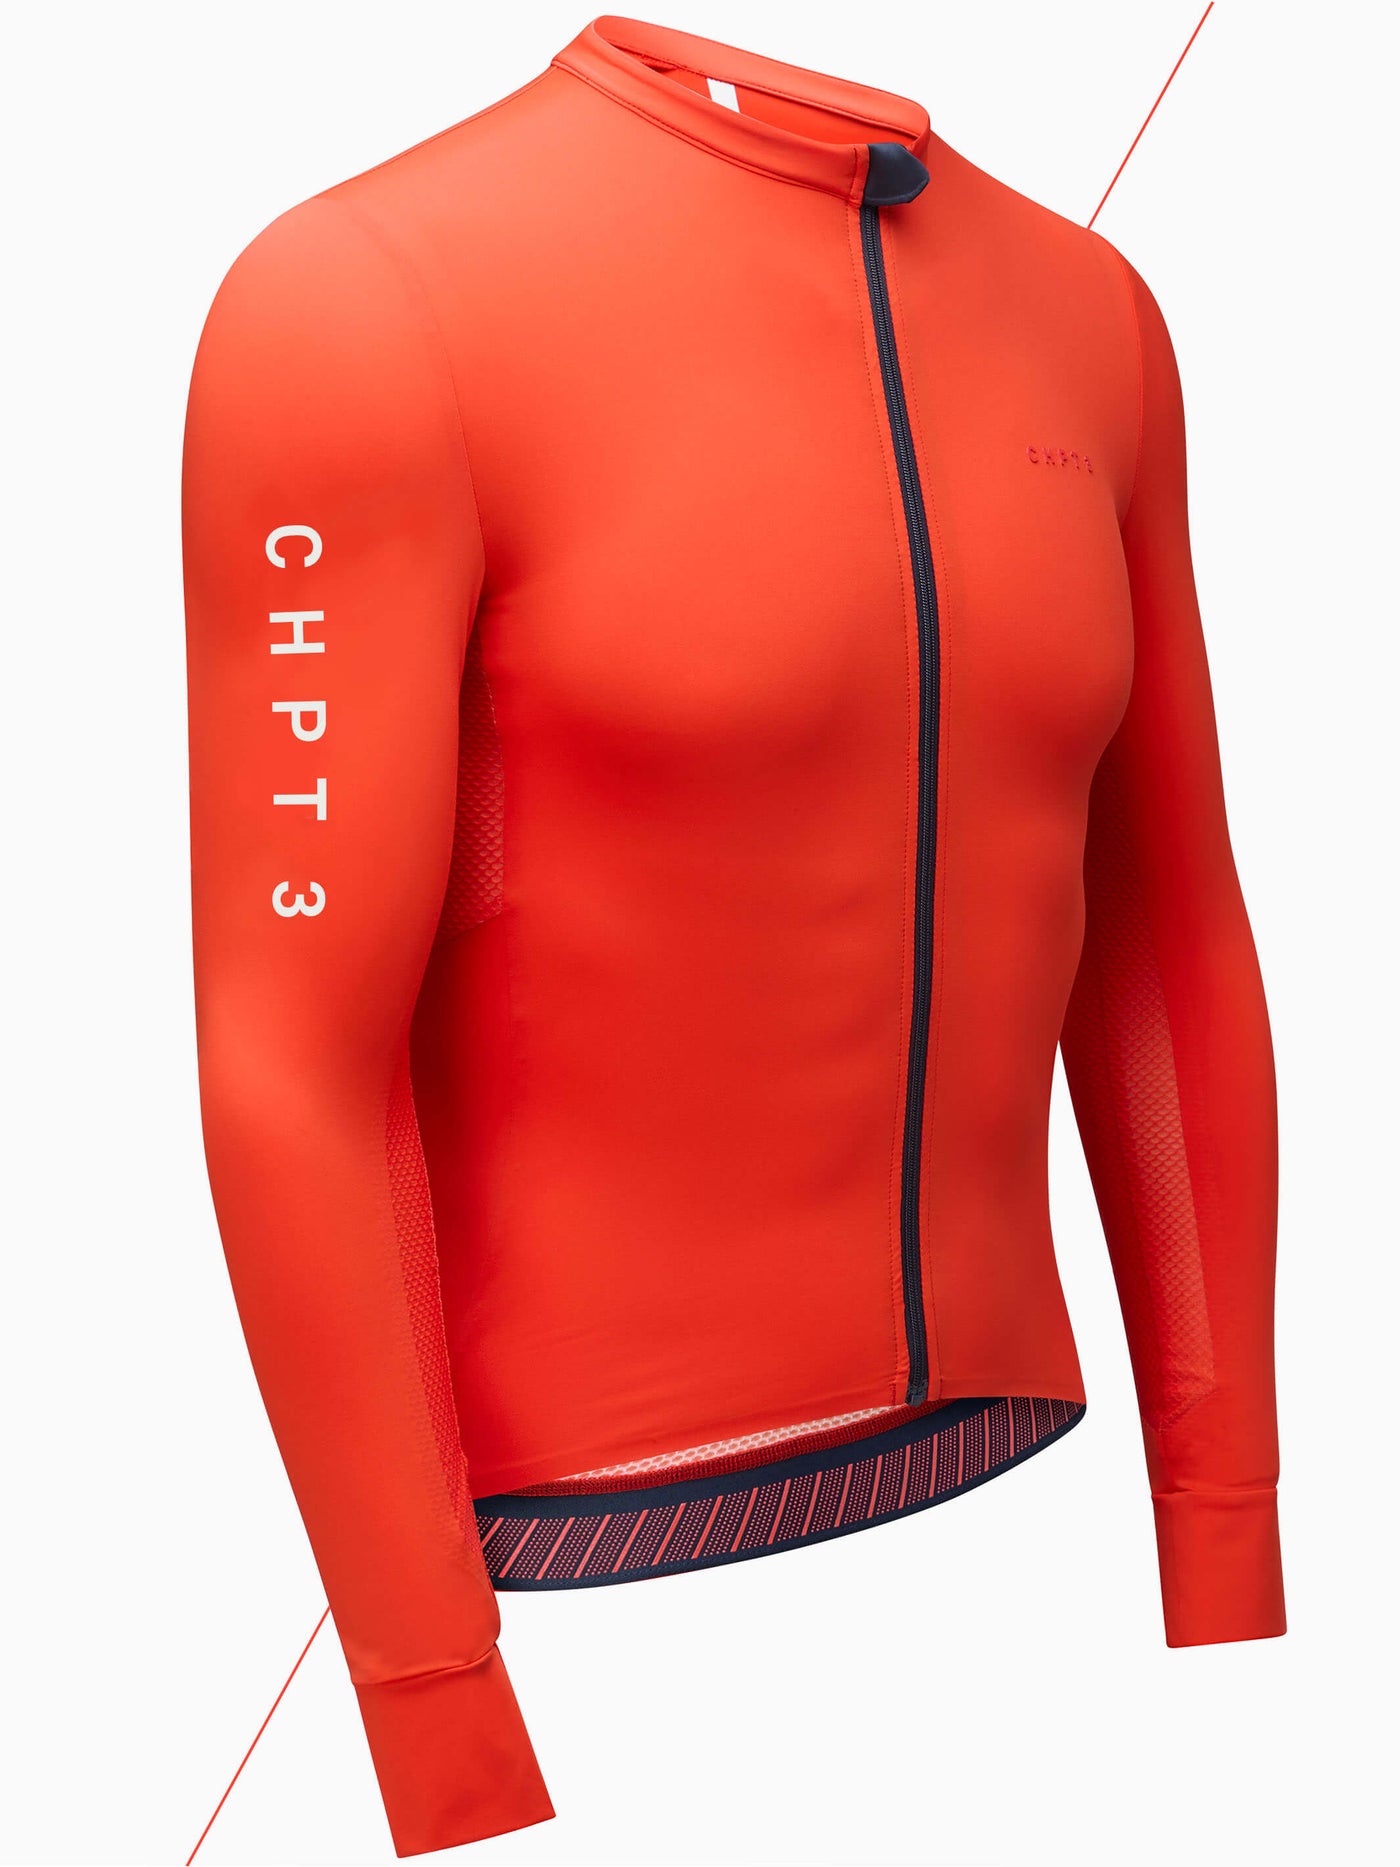 CHPT3 long sleeve jersey #color_fire-red